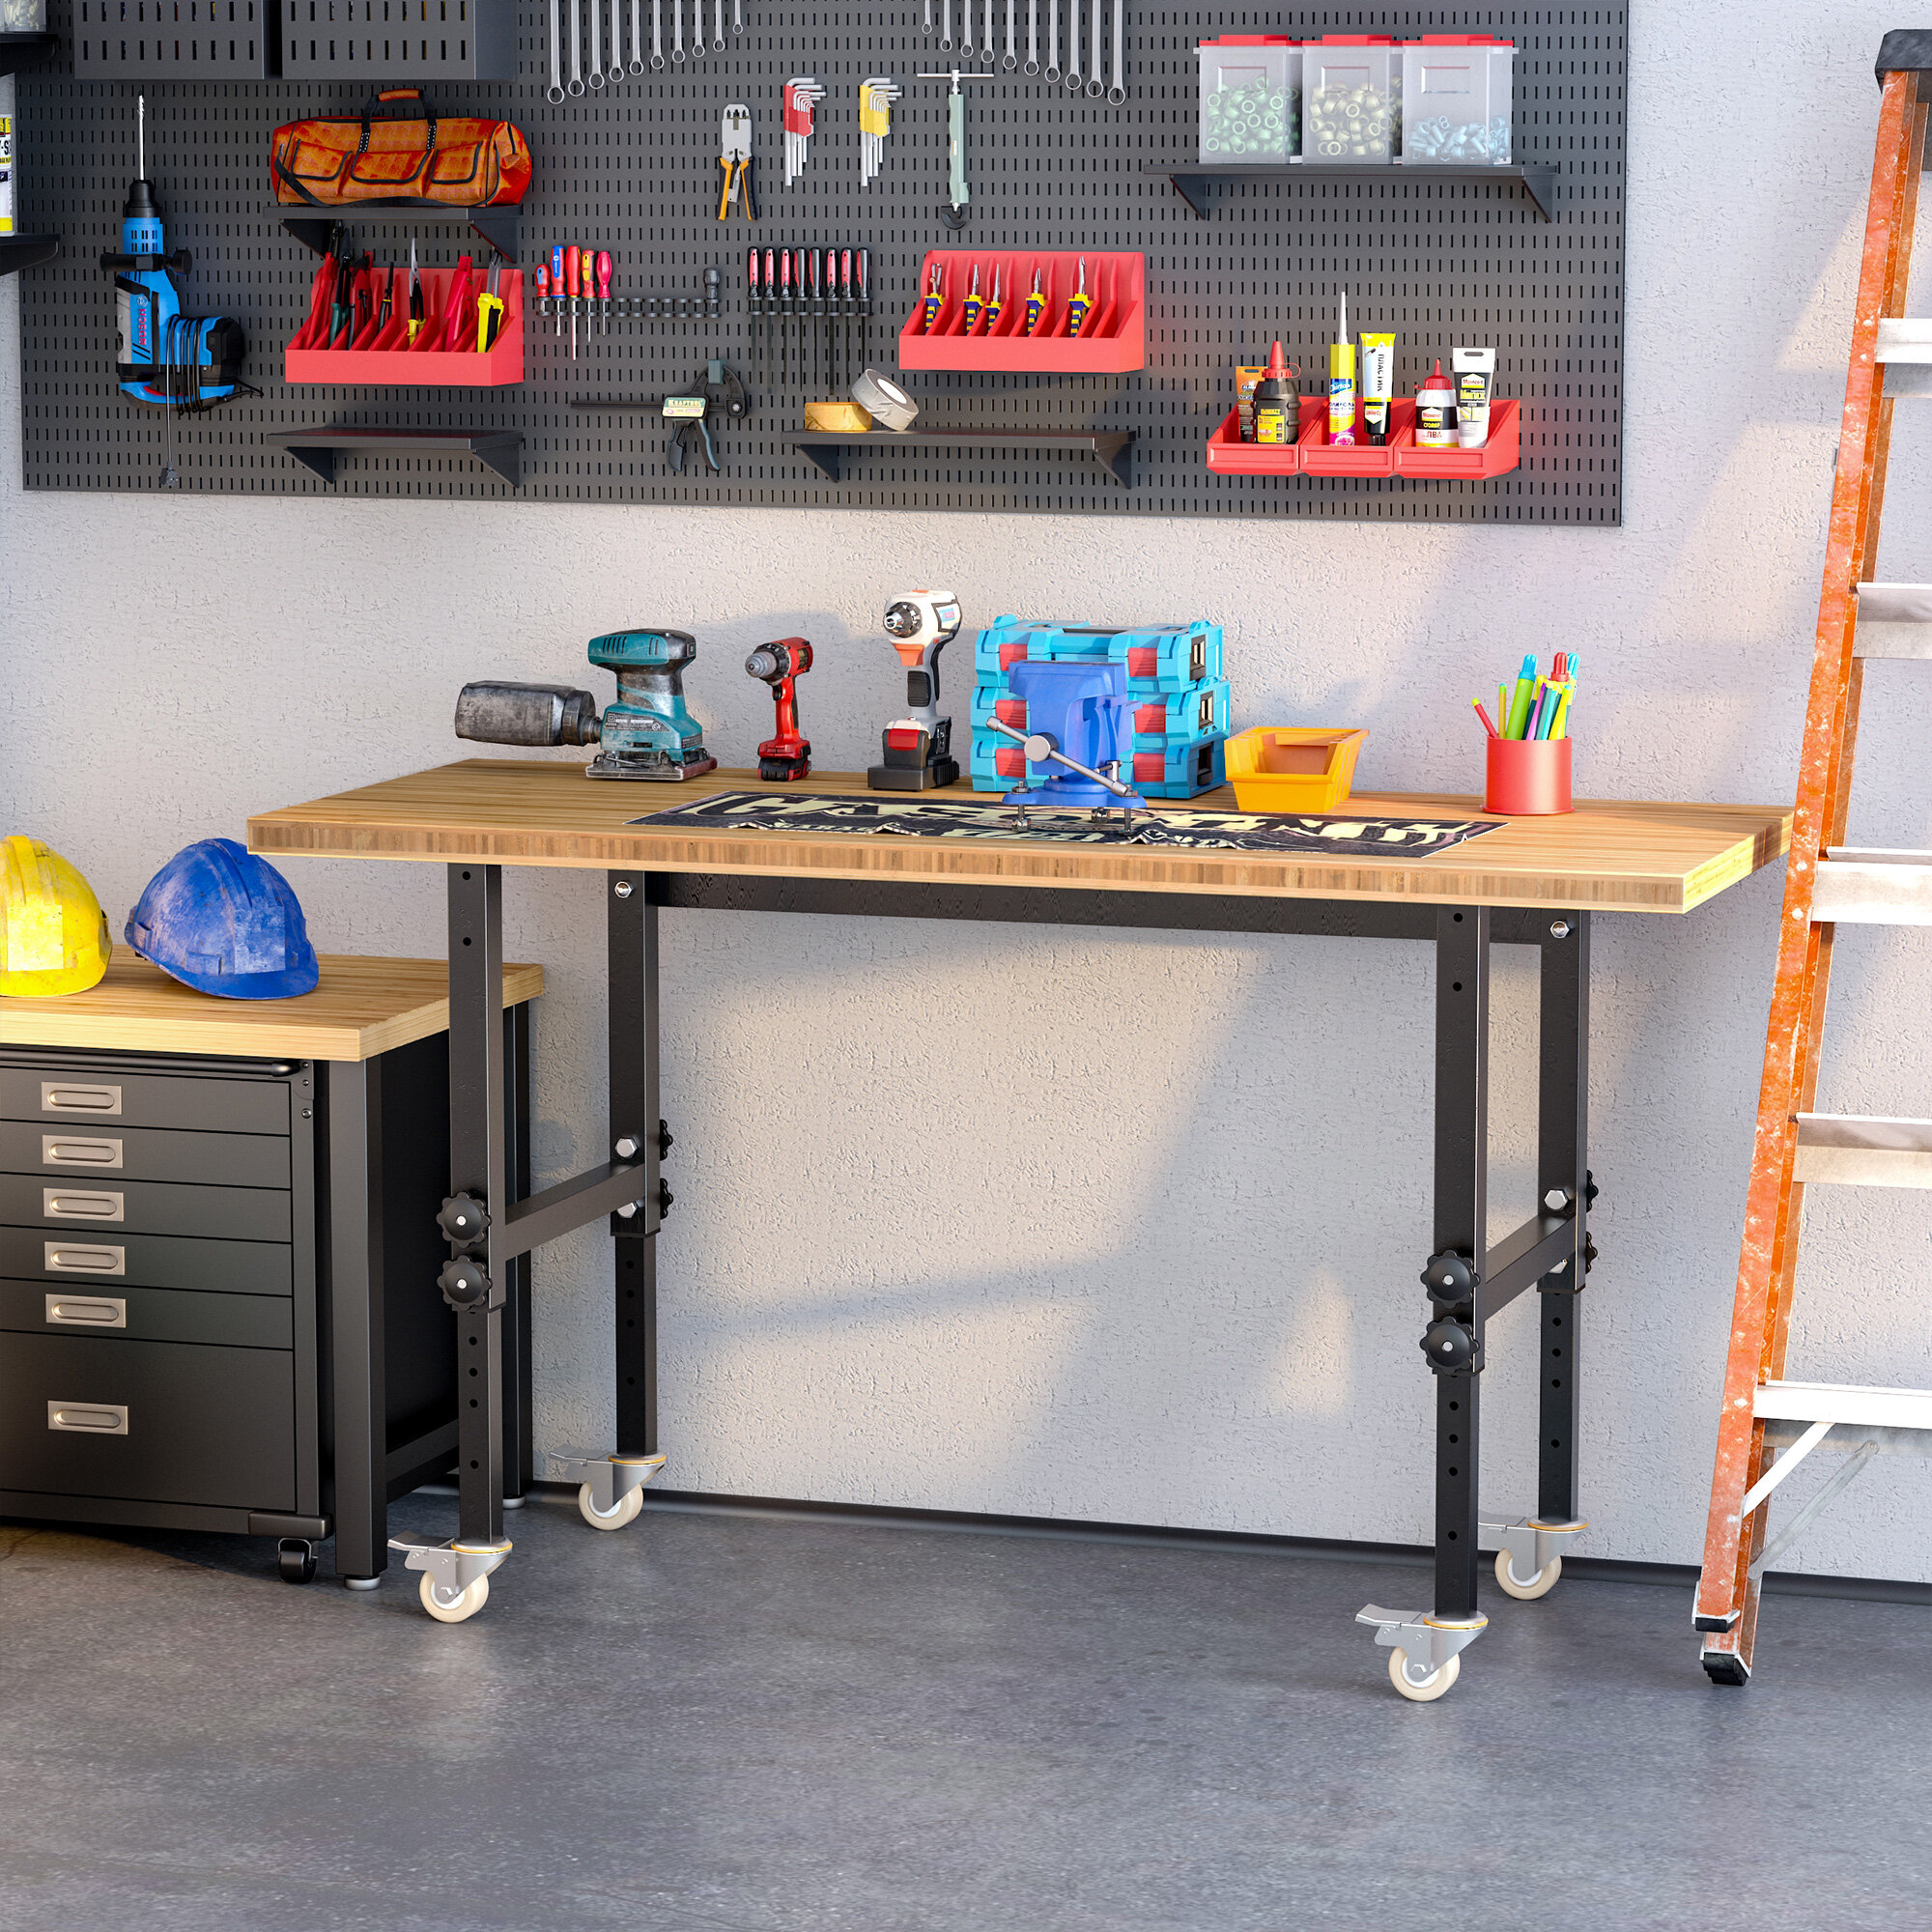 5 Top Rated Best Garage Workbench Reviews